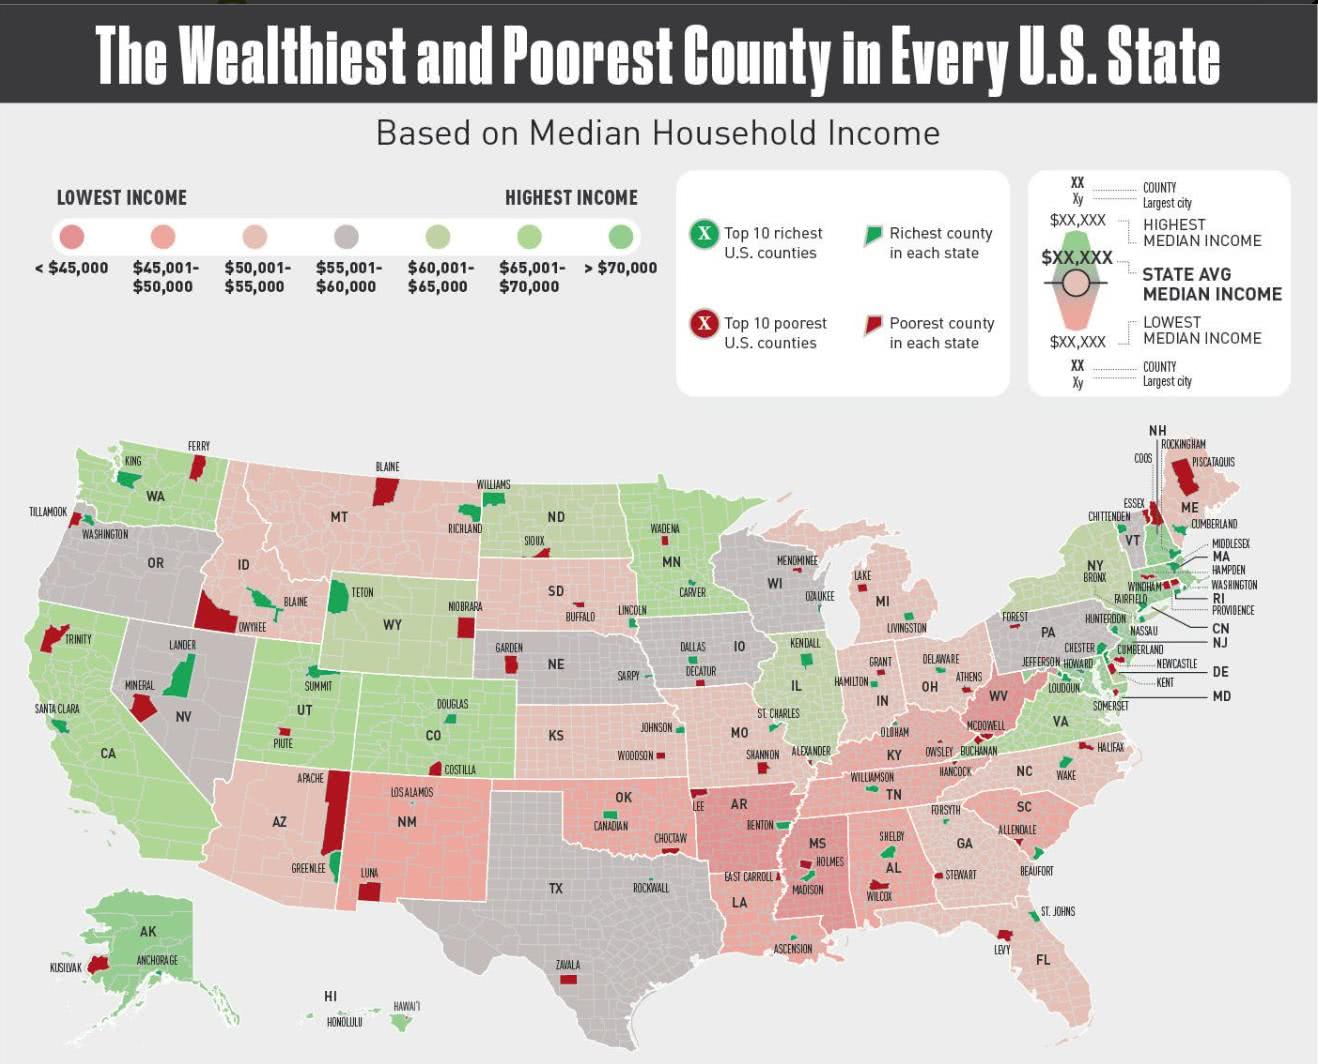 The Poorest and Wealthiest County in Every U.S. State